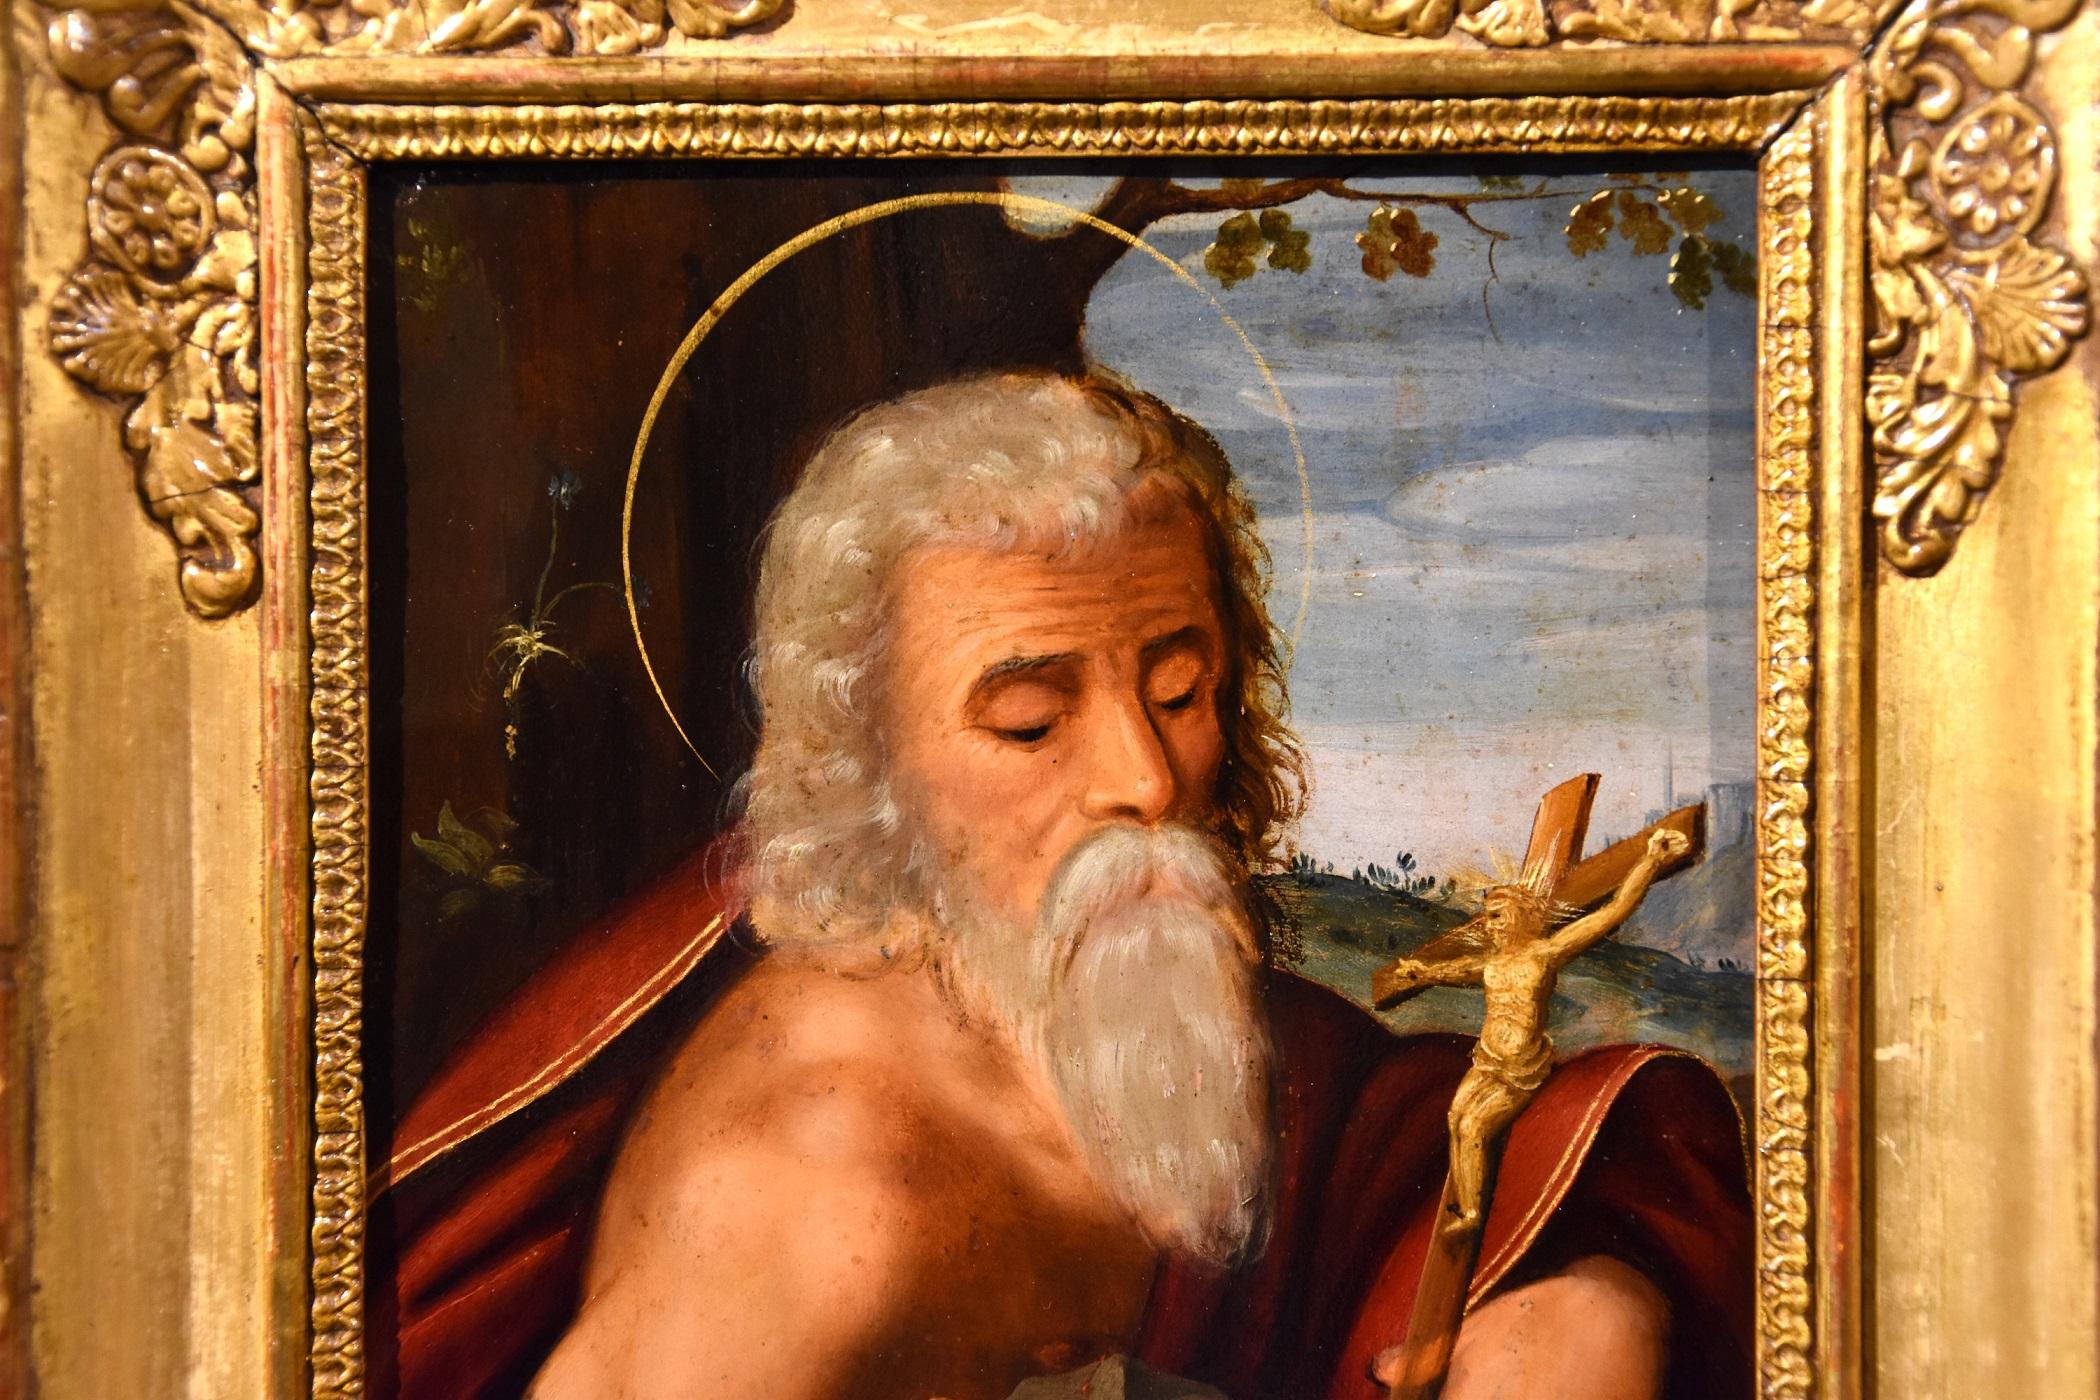 Saint Jerome Oil on copper 16th Century Paint Old master Italy Emilian school For Sale 2